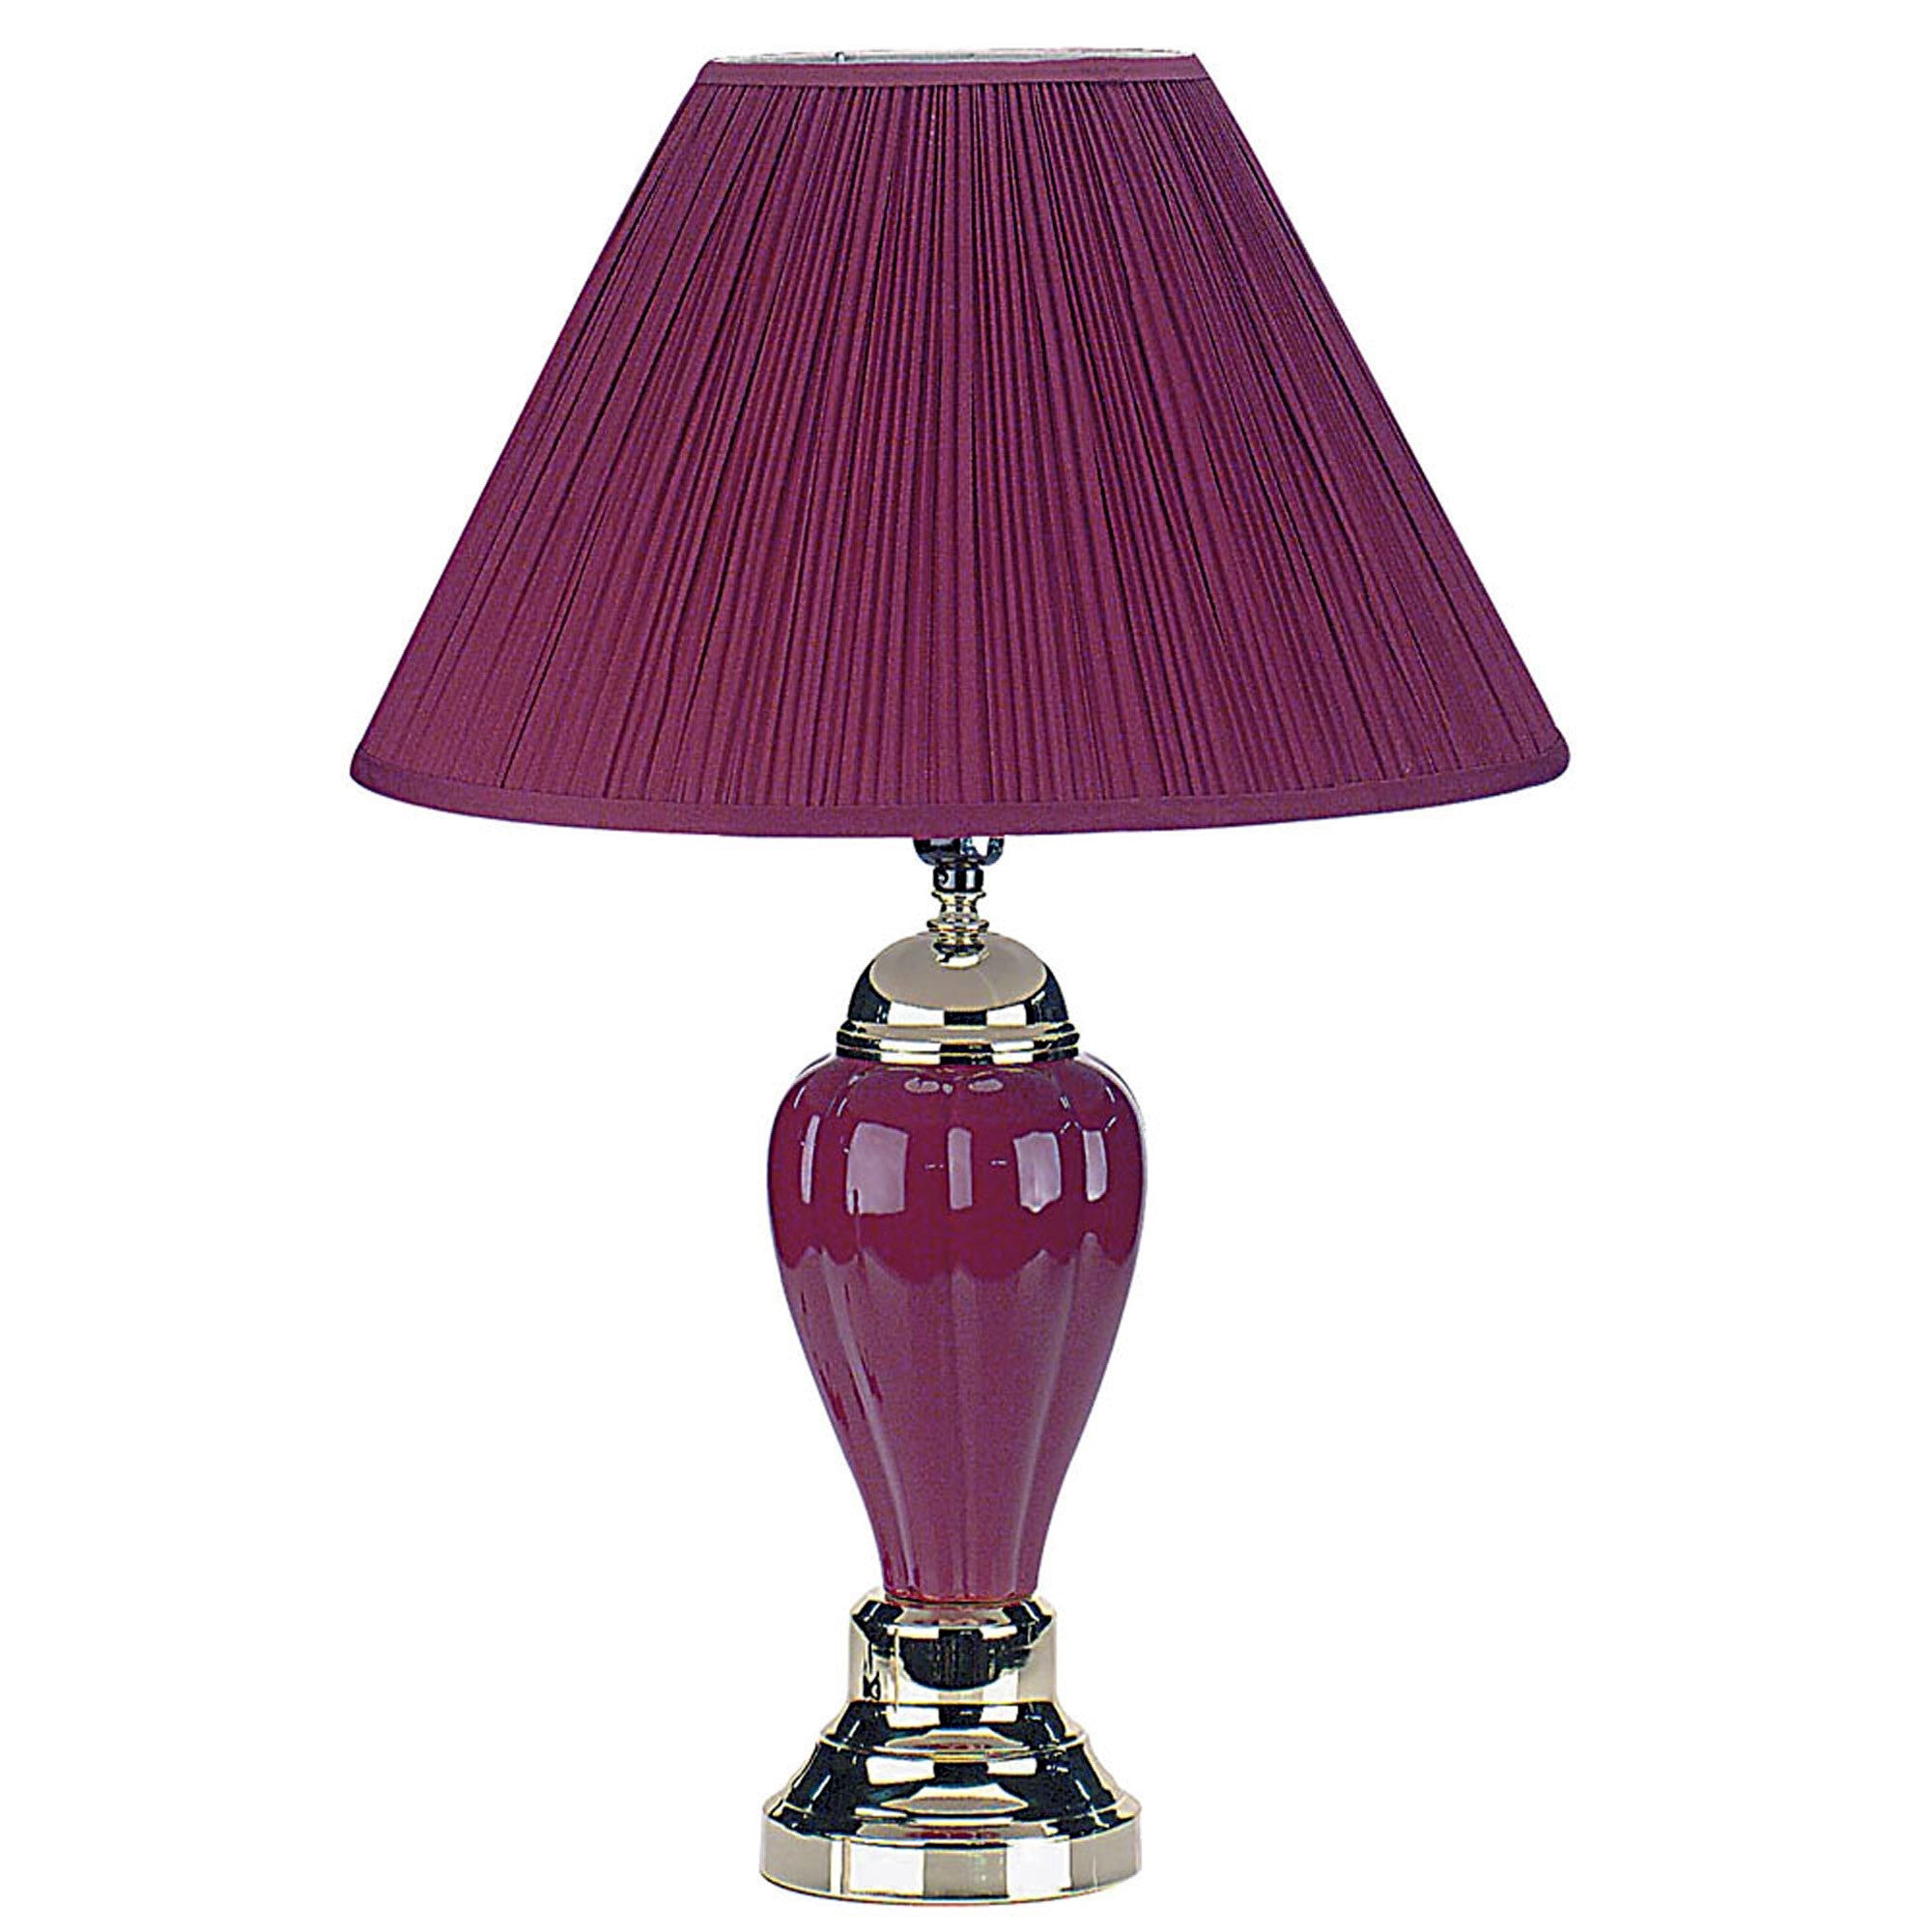 27" Silver Ceramic Bedside Table Lamp With Magenta Empire Shade